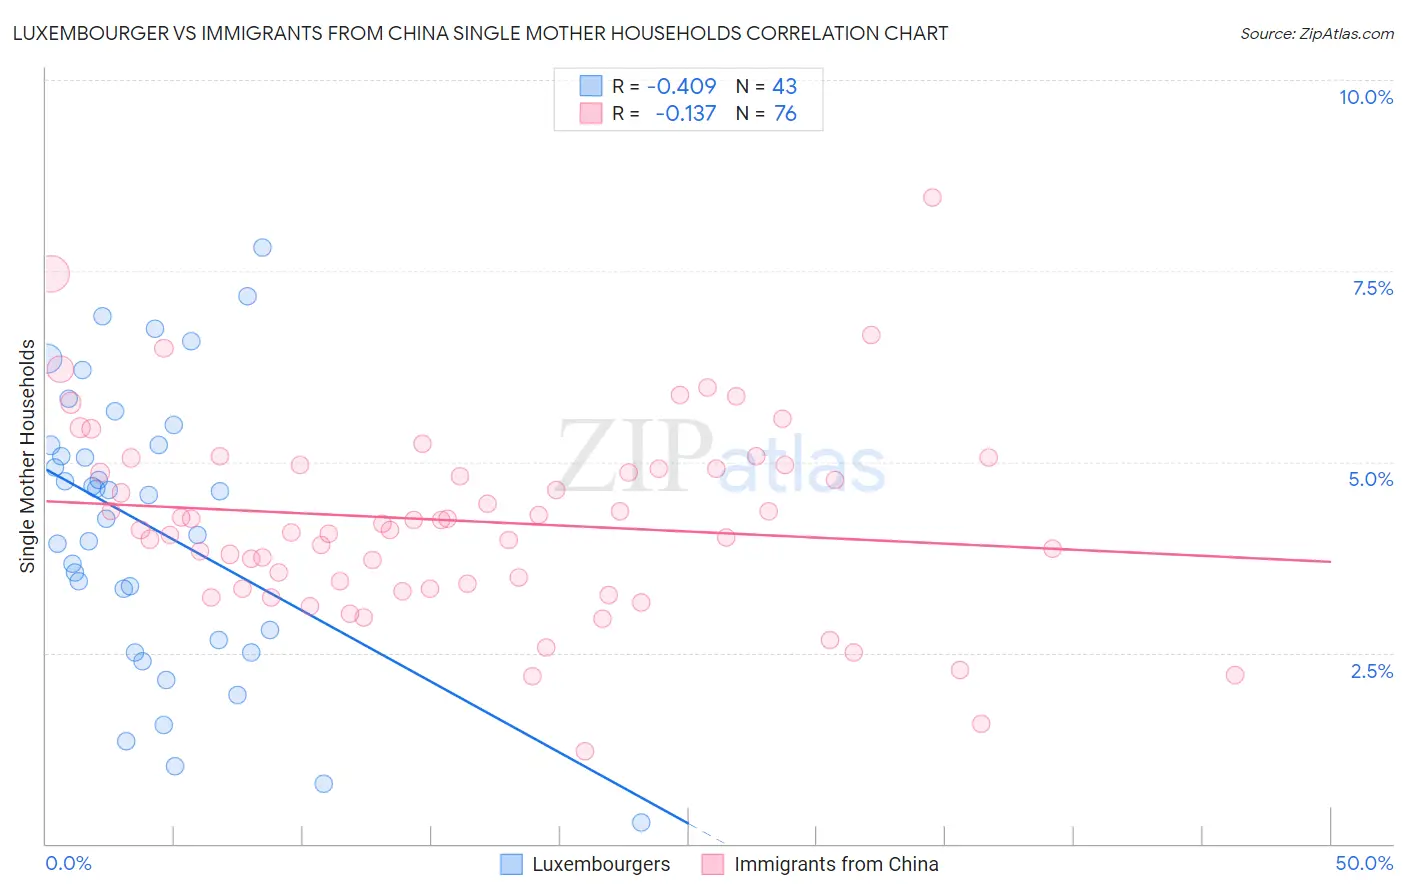 Luxembourger vs Immigrants from China Single Mother Households